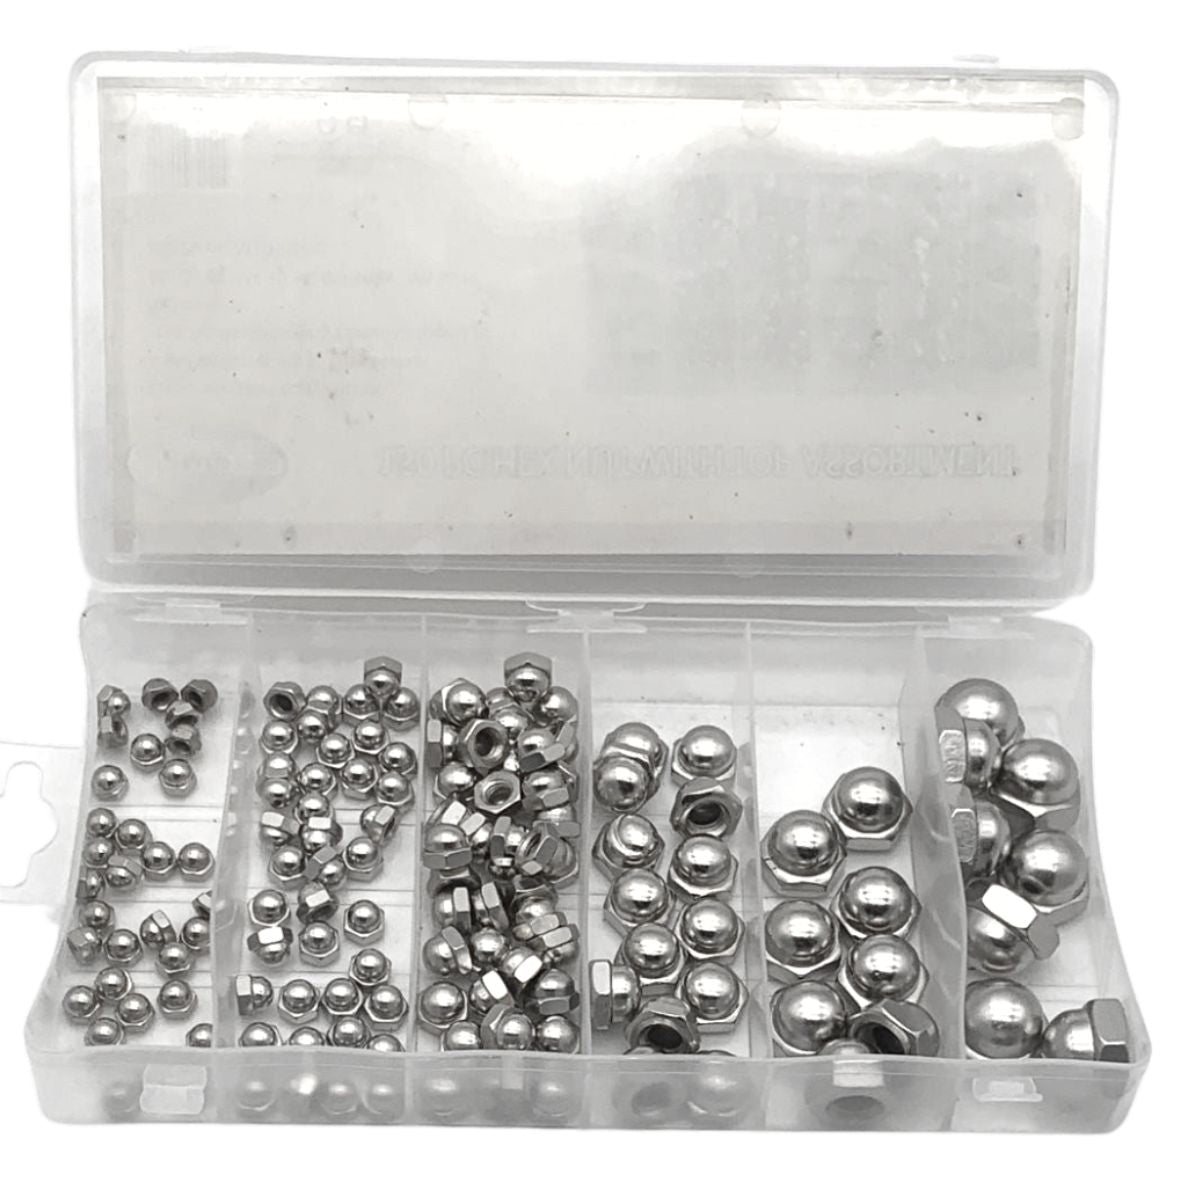 150 Piece Dome Head Hex Nut with Top Assortment Kit - South East Clearance Centre